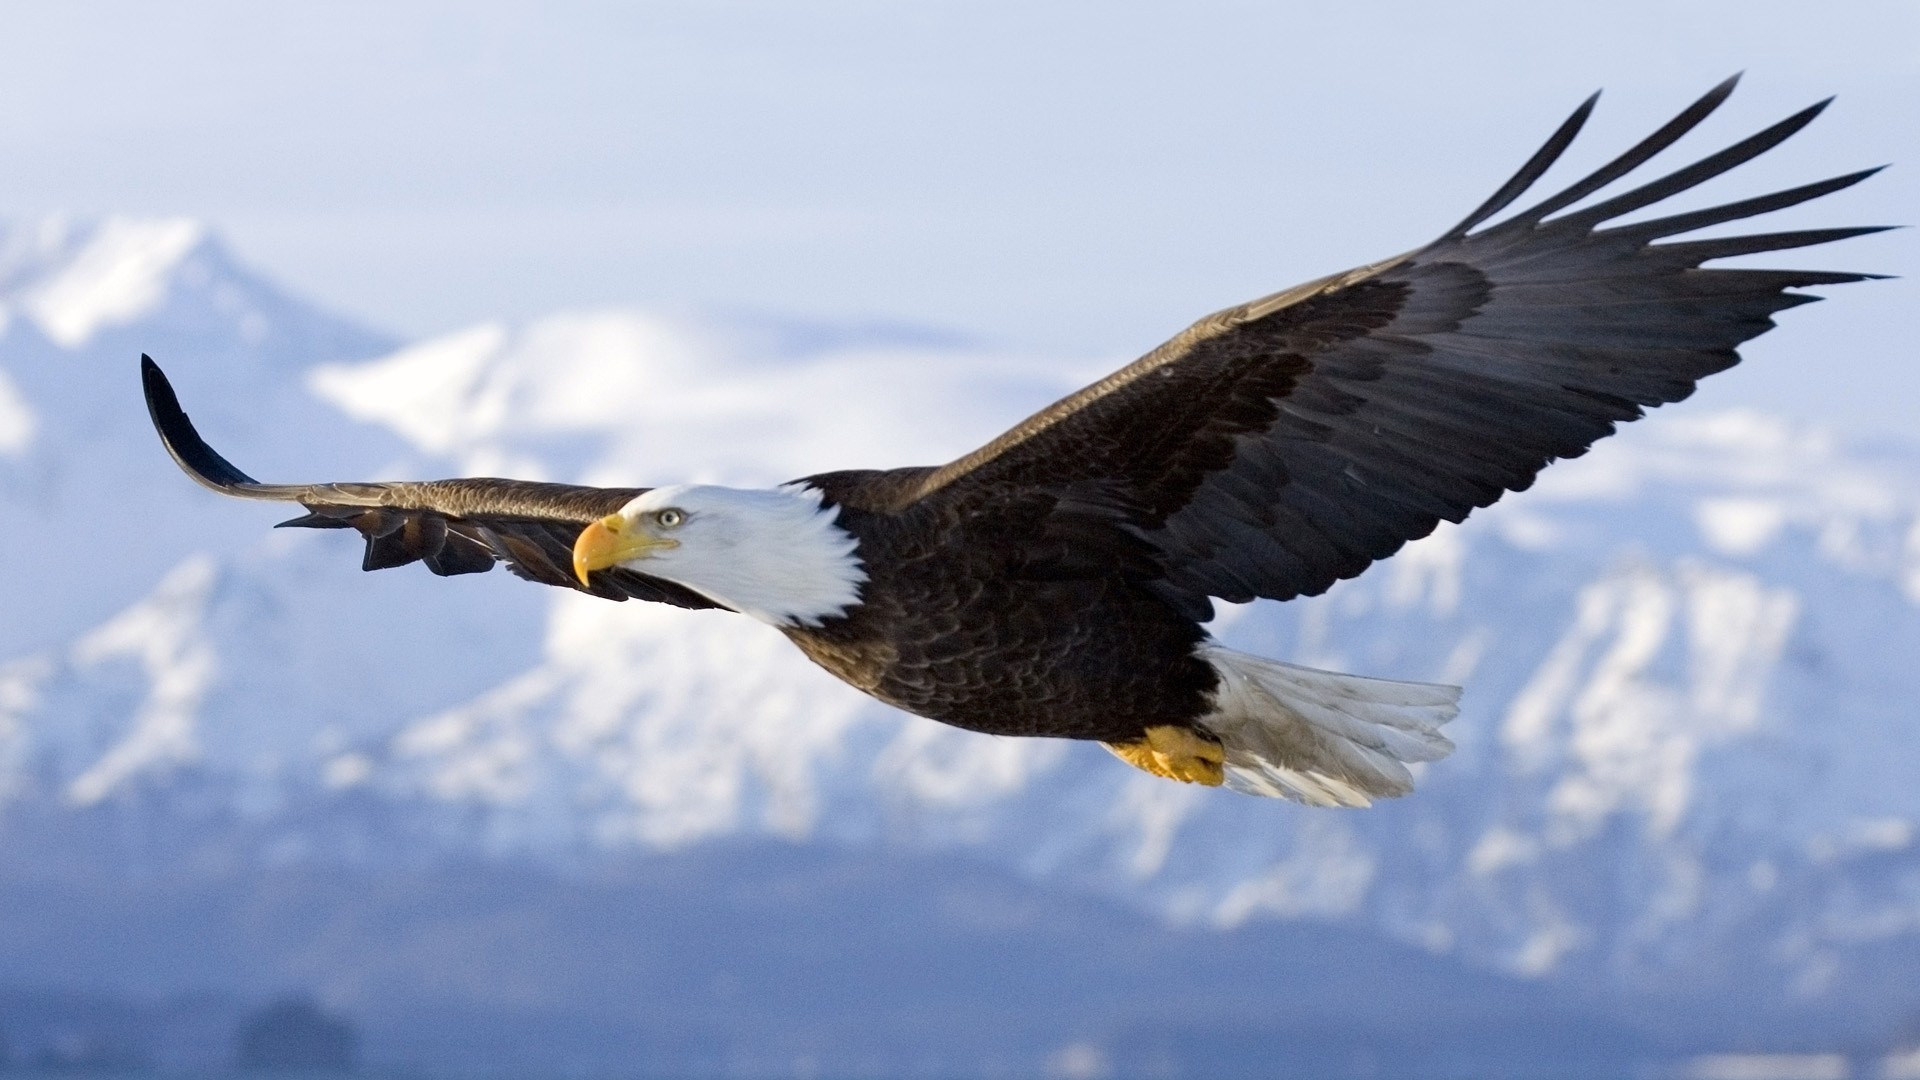 1920x1080 desktop eagle wallpapers free download | Hd Walpaper  (hd-wallpapersdownload.com) | Pinterest | Eagle wallpaper and Wallpaper